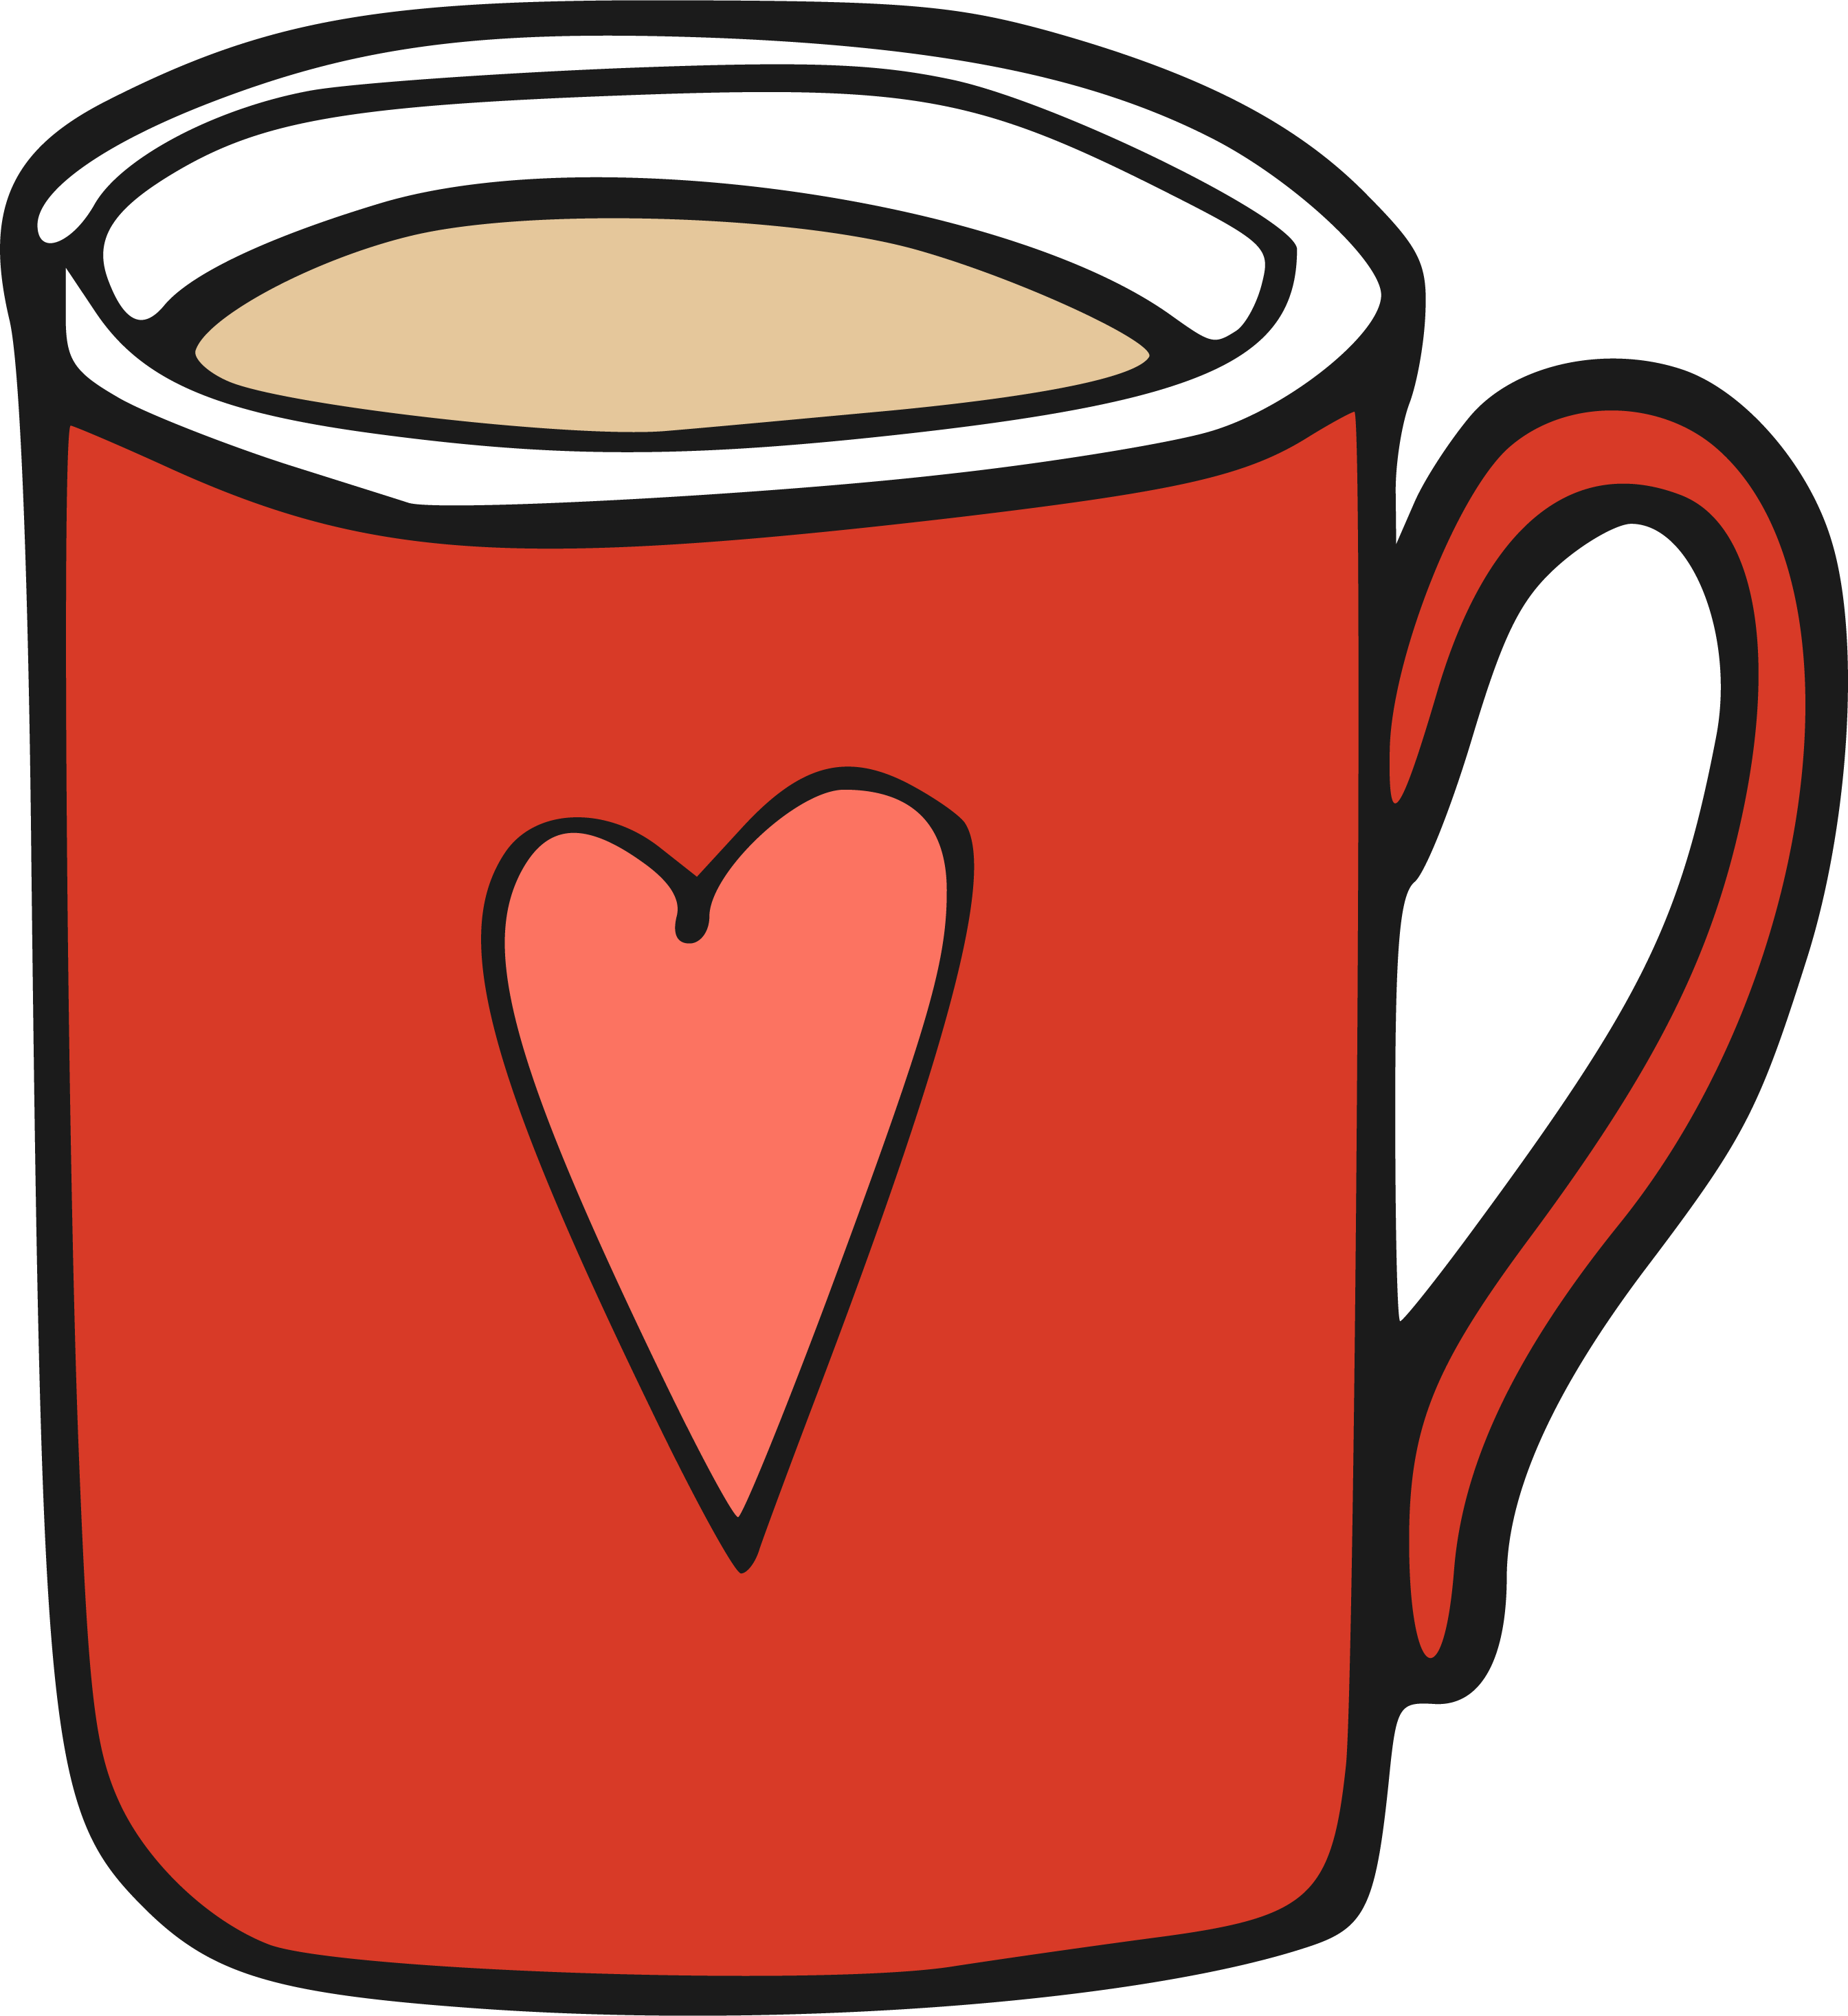 Cartoon coffee mugs clipart images gallery for free download